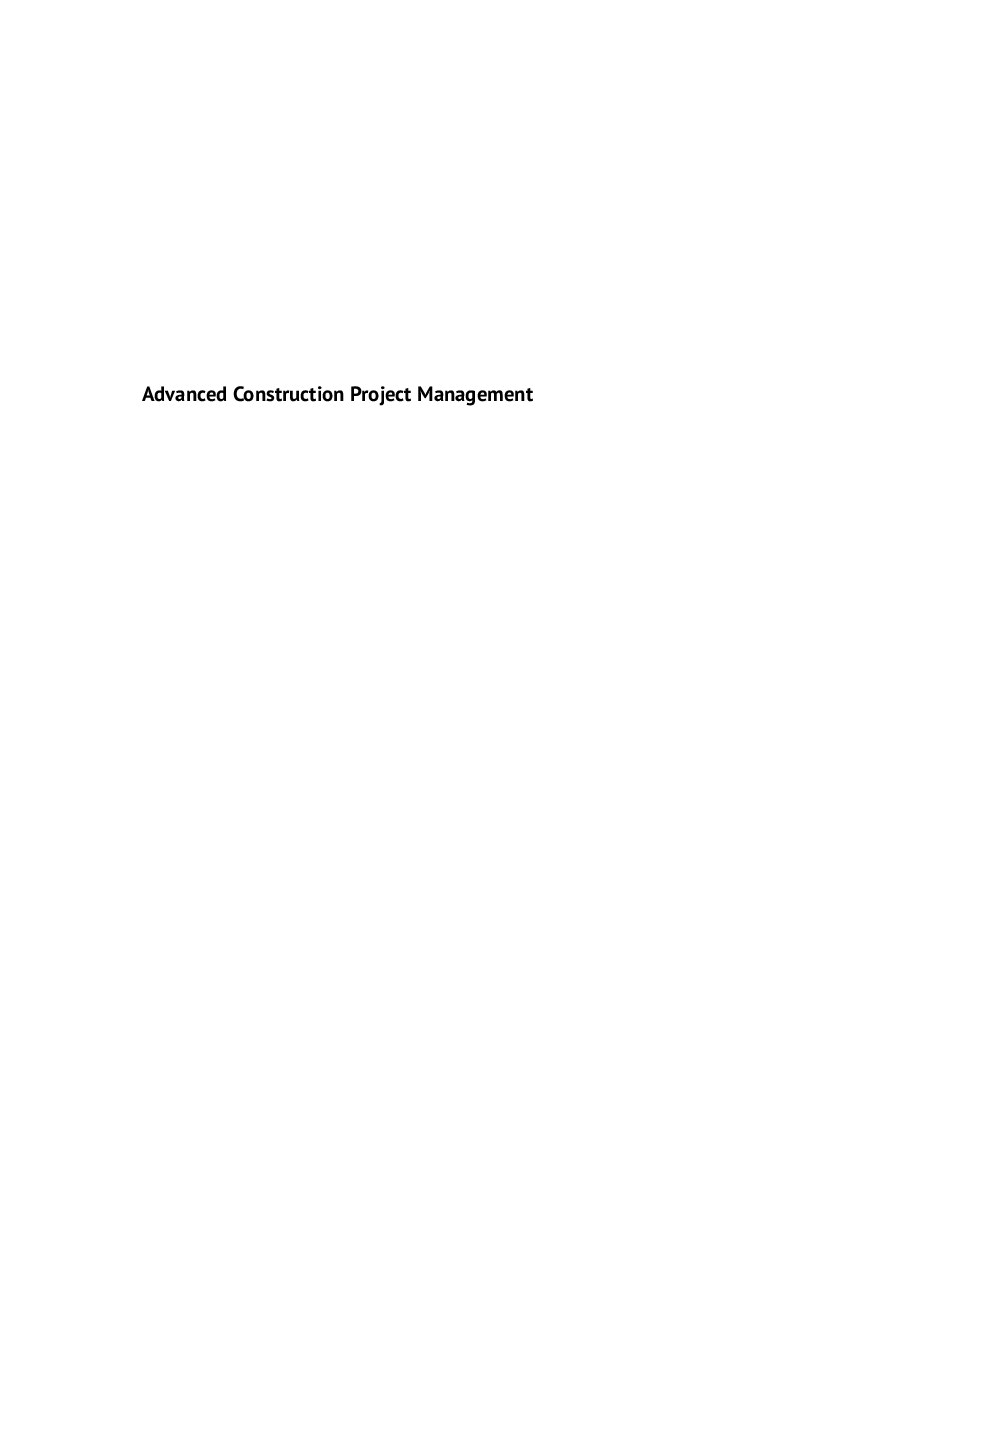 Advanced Construction Project Management_ The Complexity of Megaprojects, (2020)